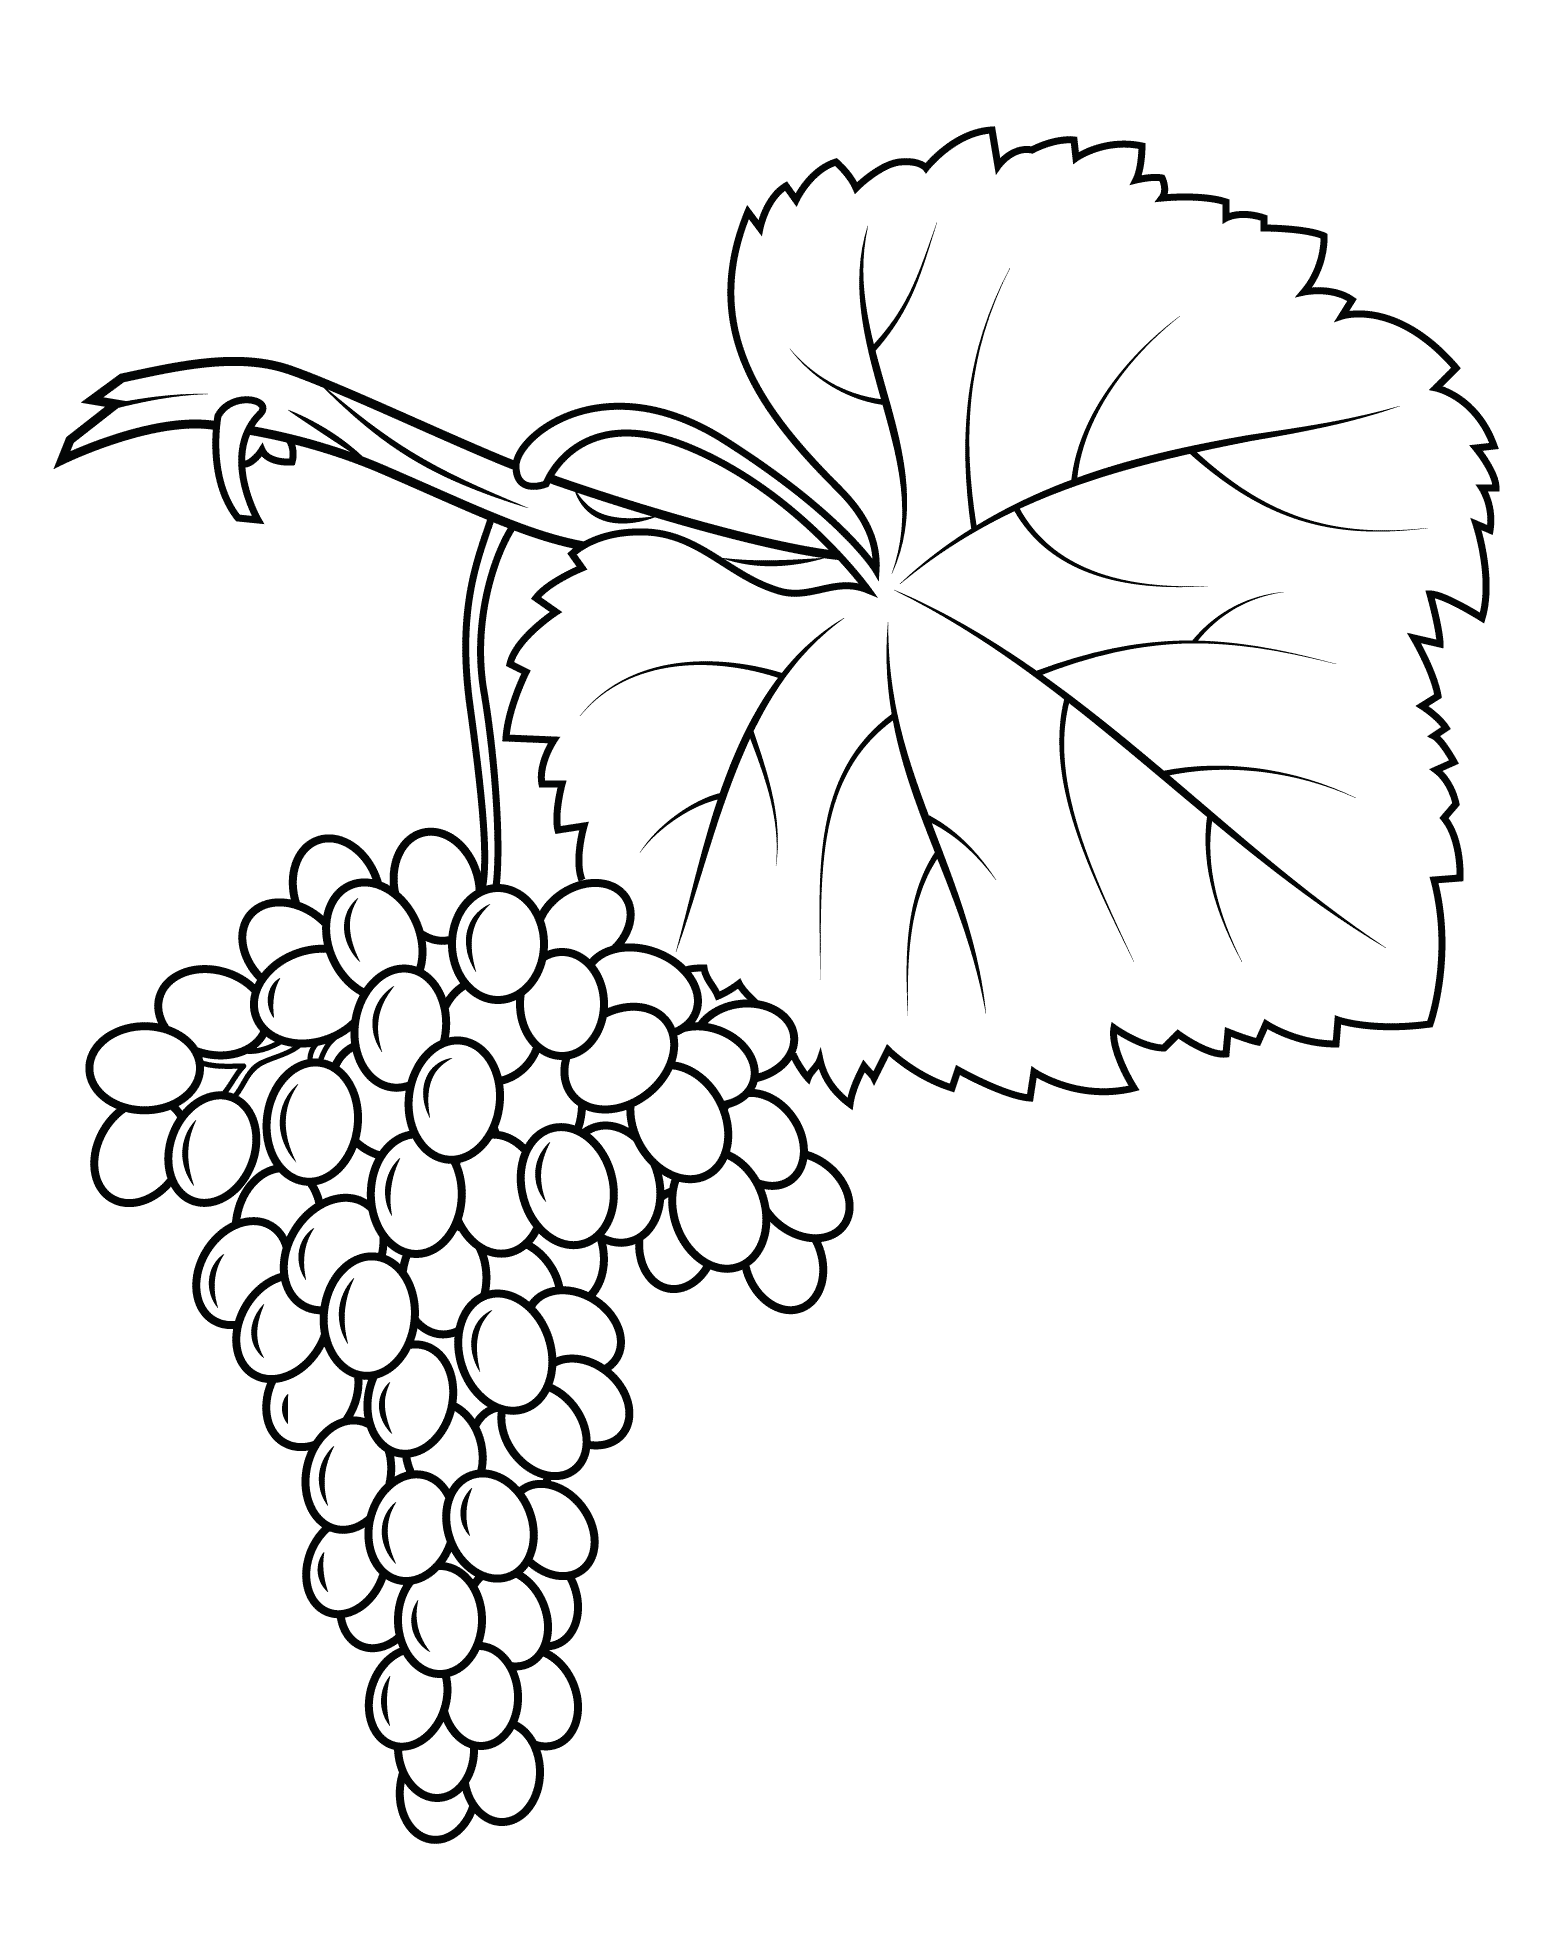 Download Grapes Coloring Pages - Best Coloring Pages For Kids